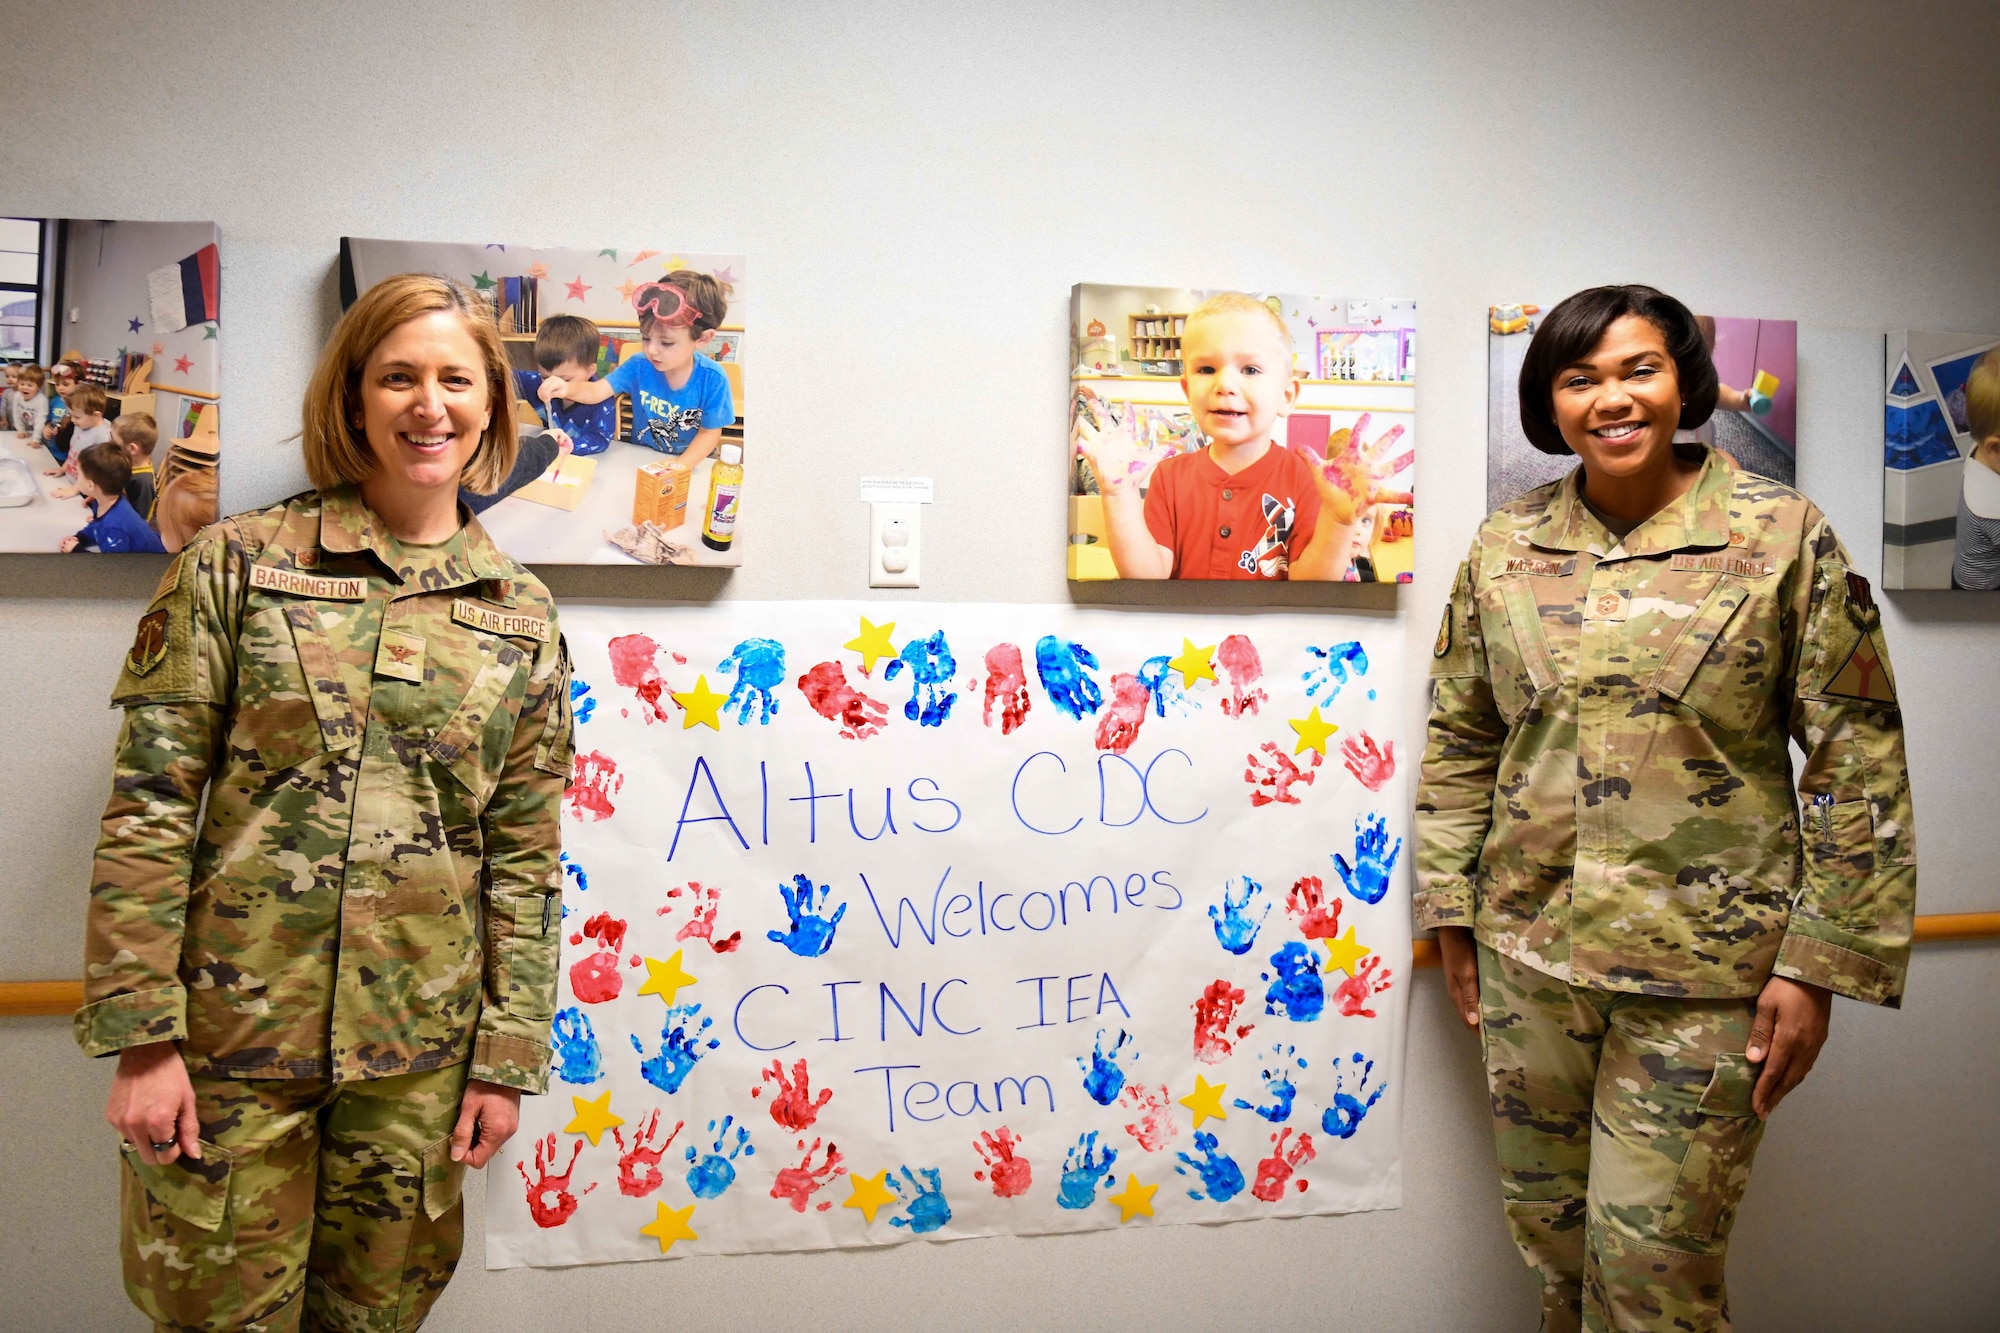 Col. Catherine Barrington, 90th Missile Wing commander and Chief Master Sgt. Adrienne Warren, 32nd Air Expeditionary Wing command chief, pose in front of a sign in the child development center (CDC) at Altus Air Force Base, Oklahoma, Jan. 20, 2023. Karrie Garrett, 97th Force Support Squadron CDC director, gave Barrington and Warren a full tour of the facility. (U.S. Air Force photo by Airman 1st Class Kari Degraffenreed)